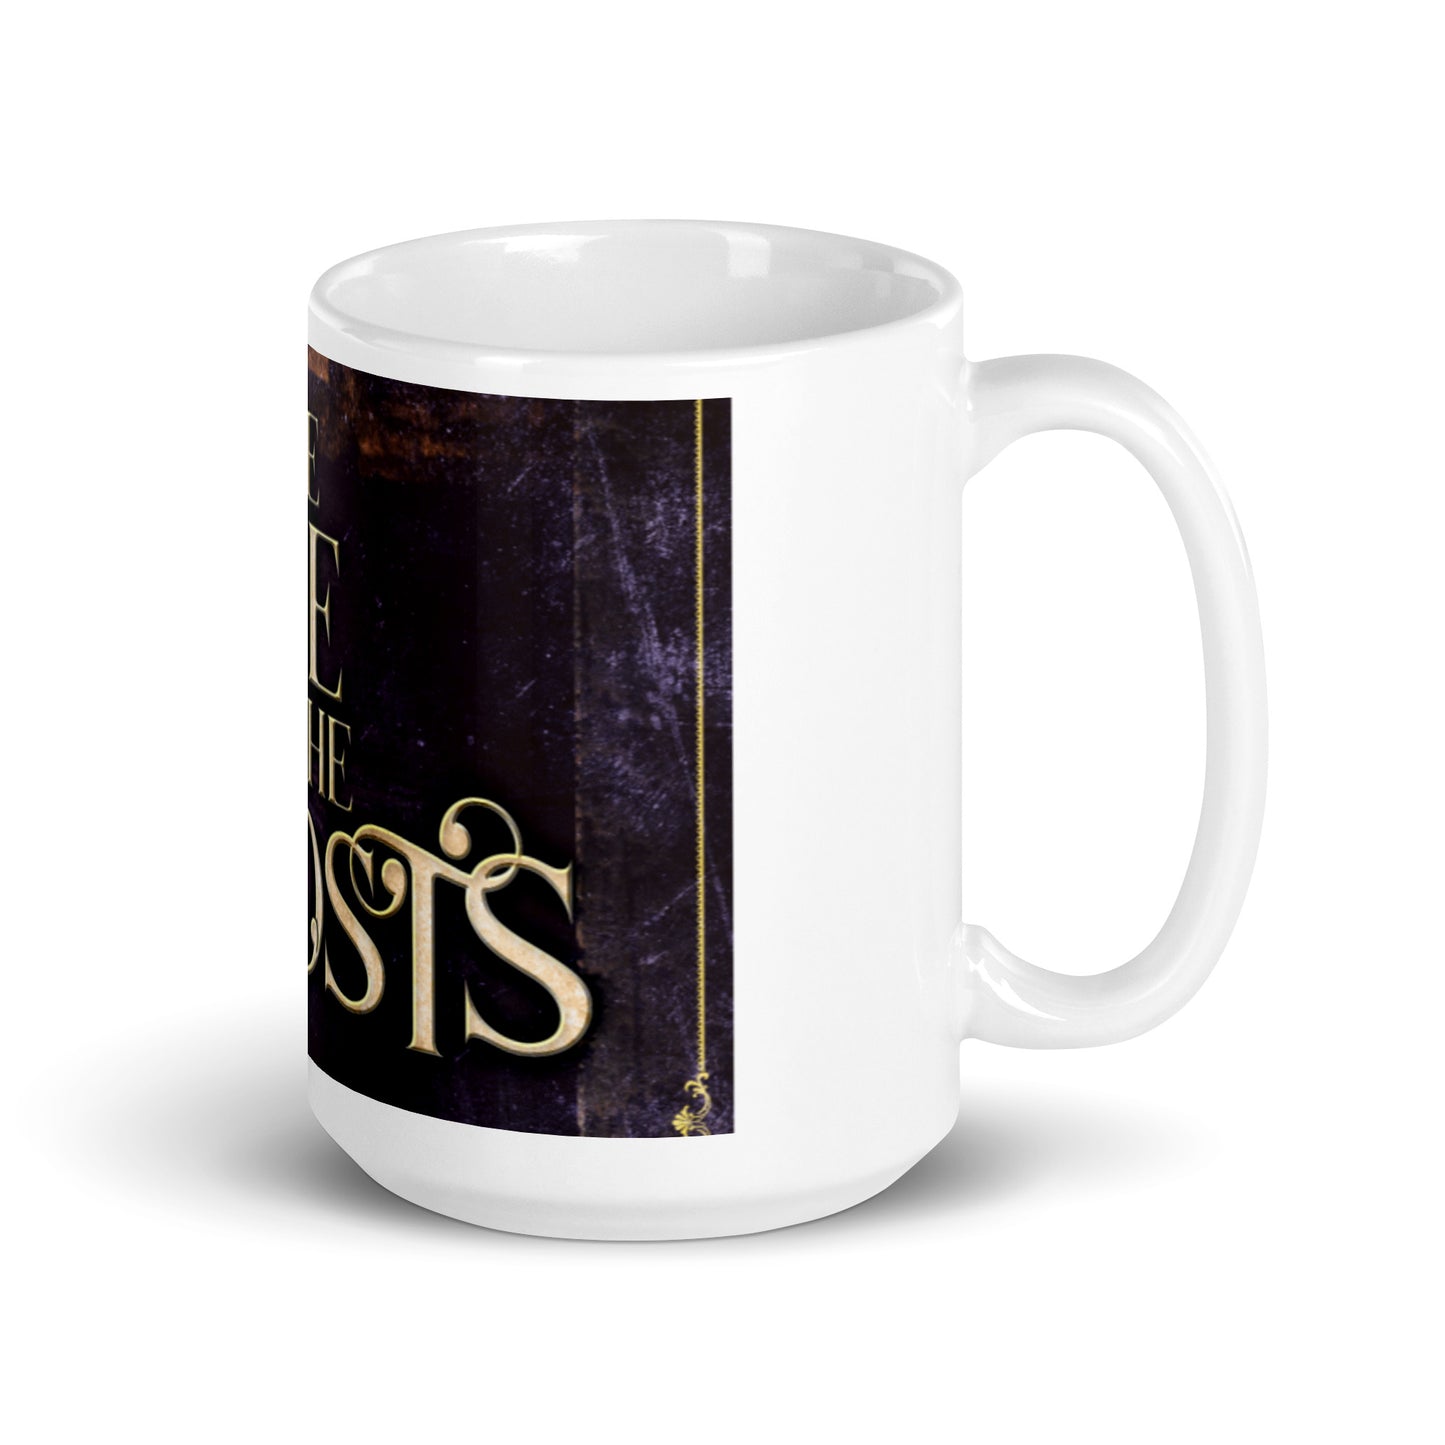 The Time Of The Ghosts - White Coffee Mug